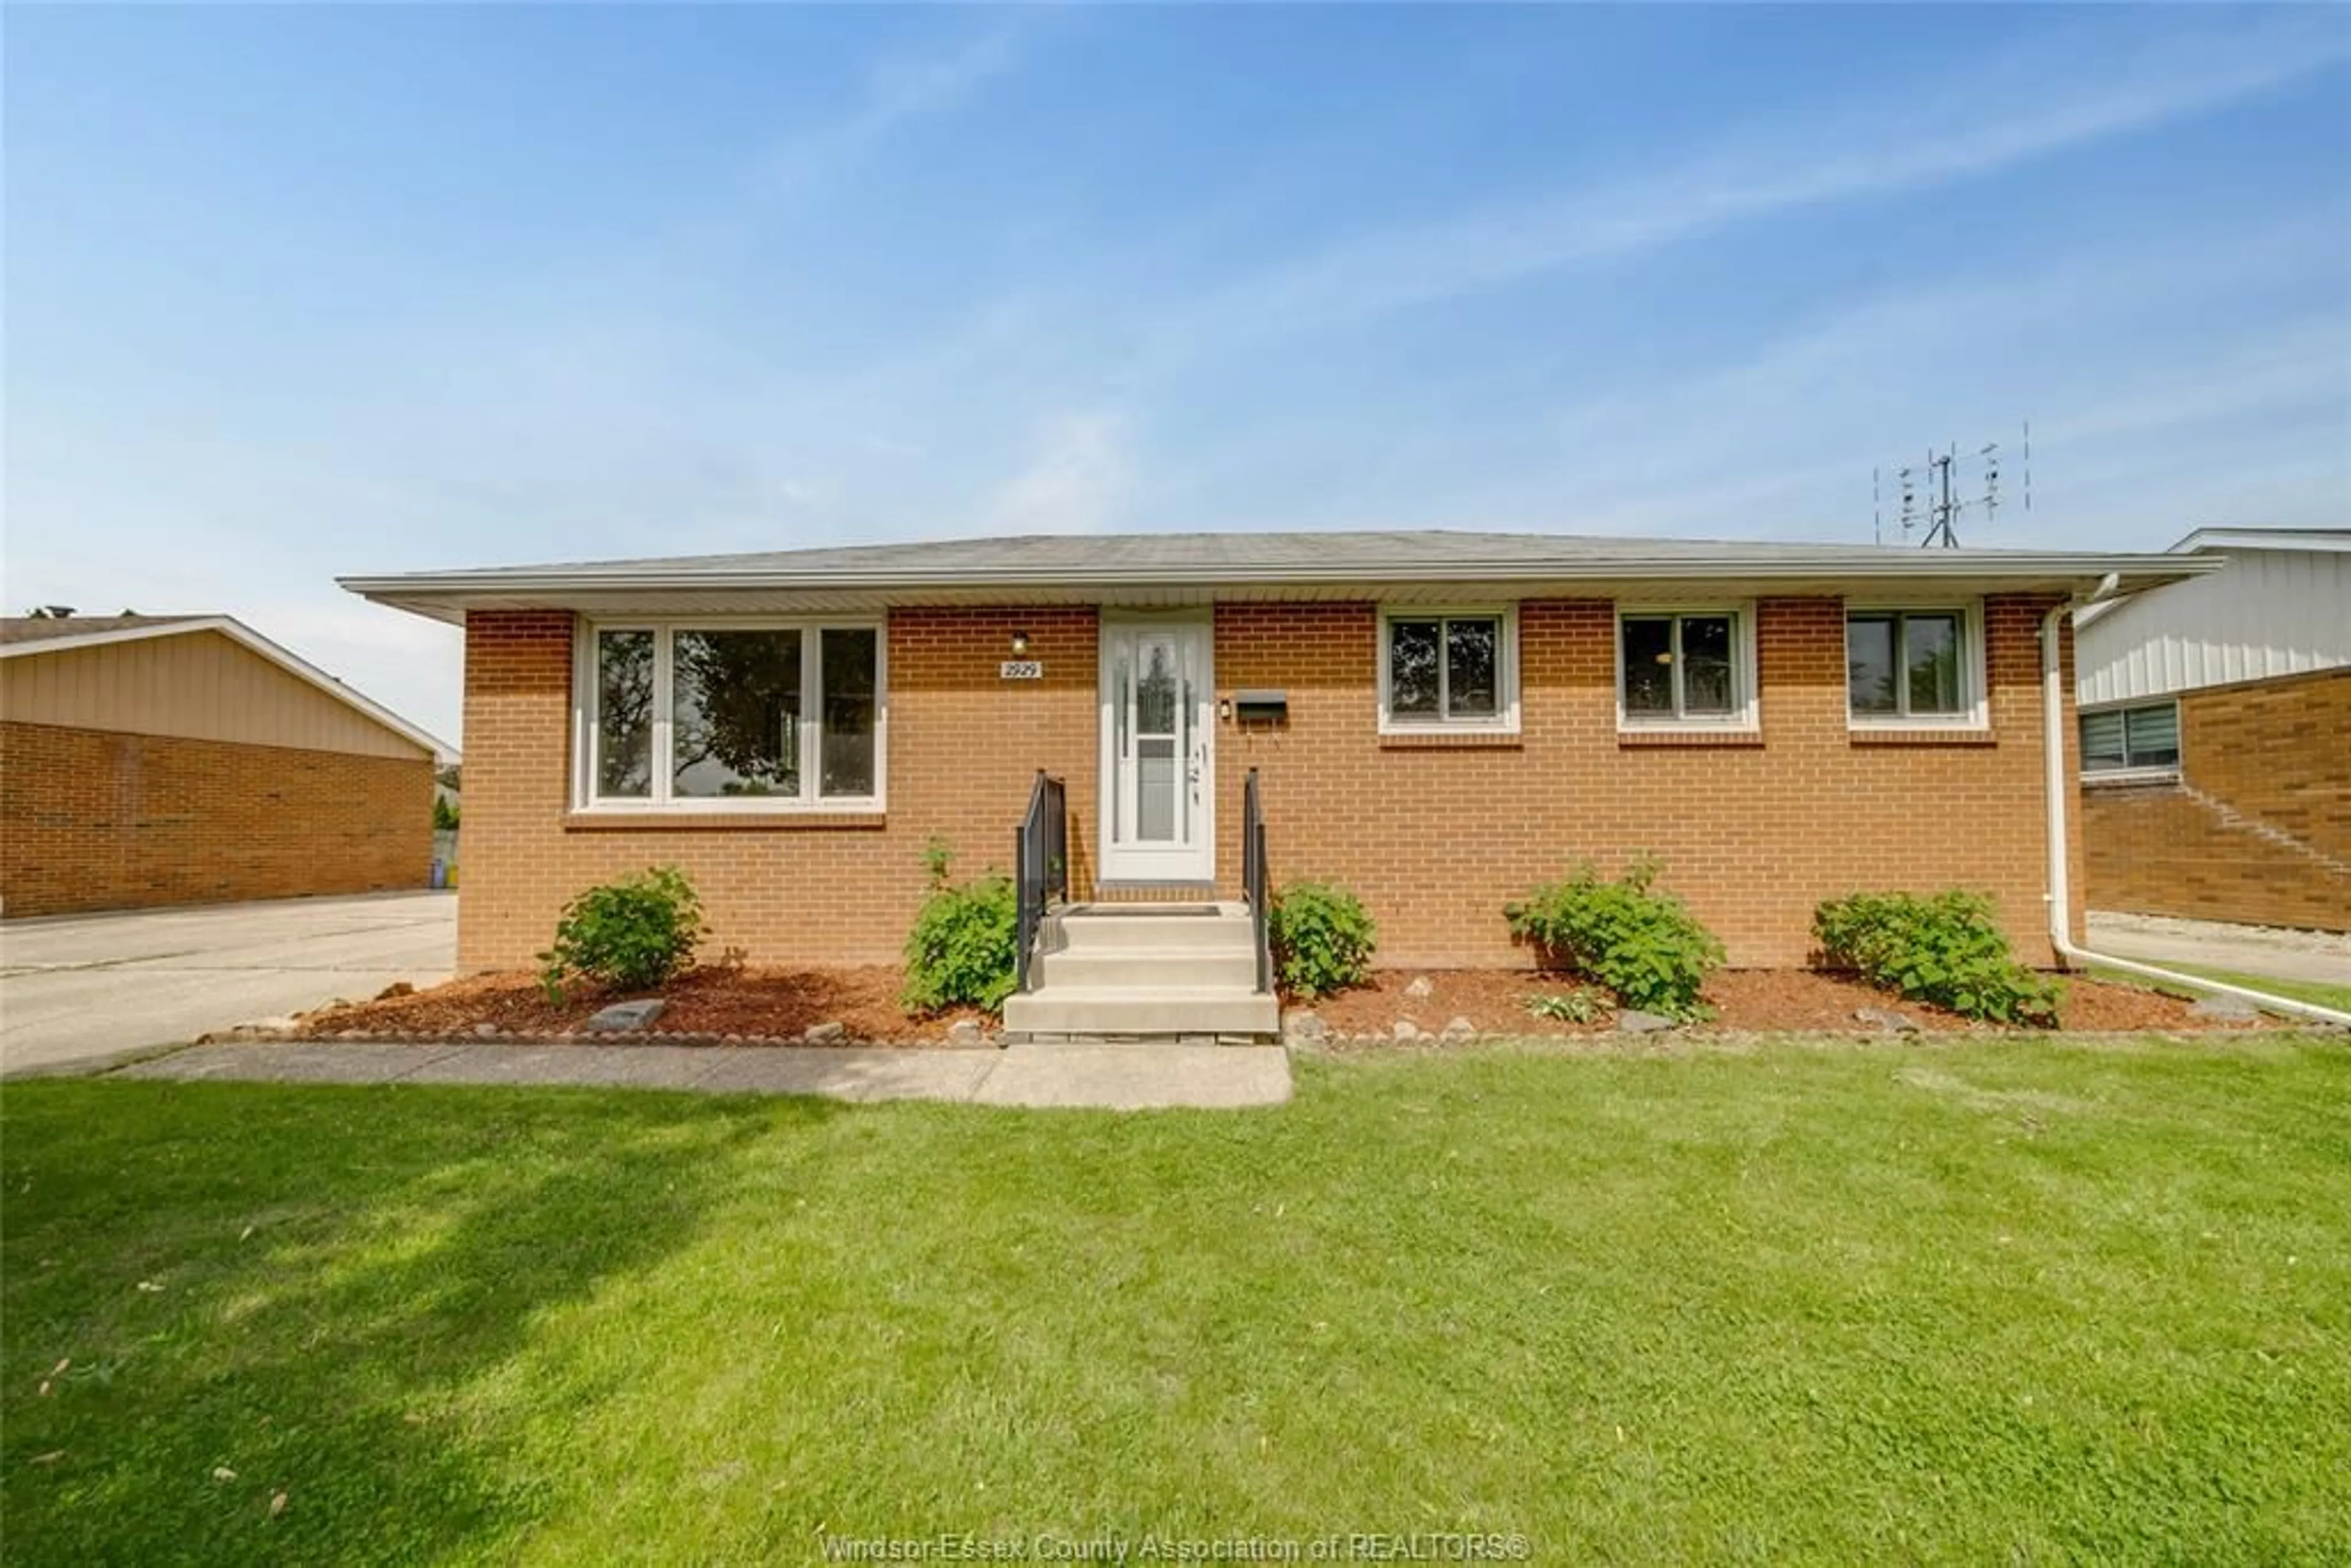 Home with brick exterior material for 2929 RIVARD, Windsor Ontario N8T 2J1